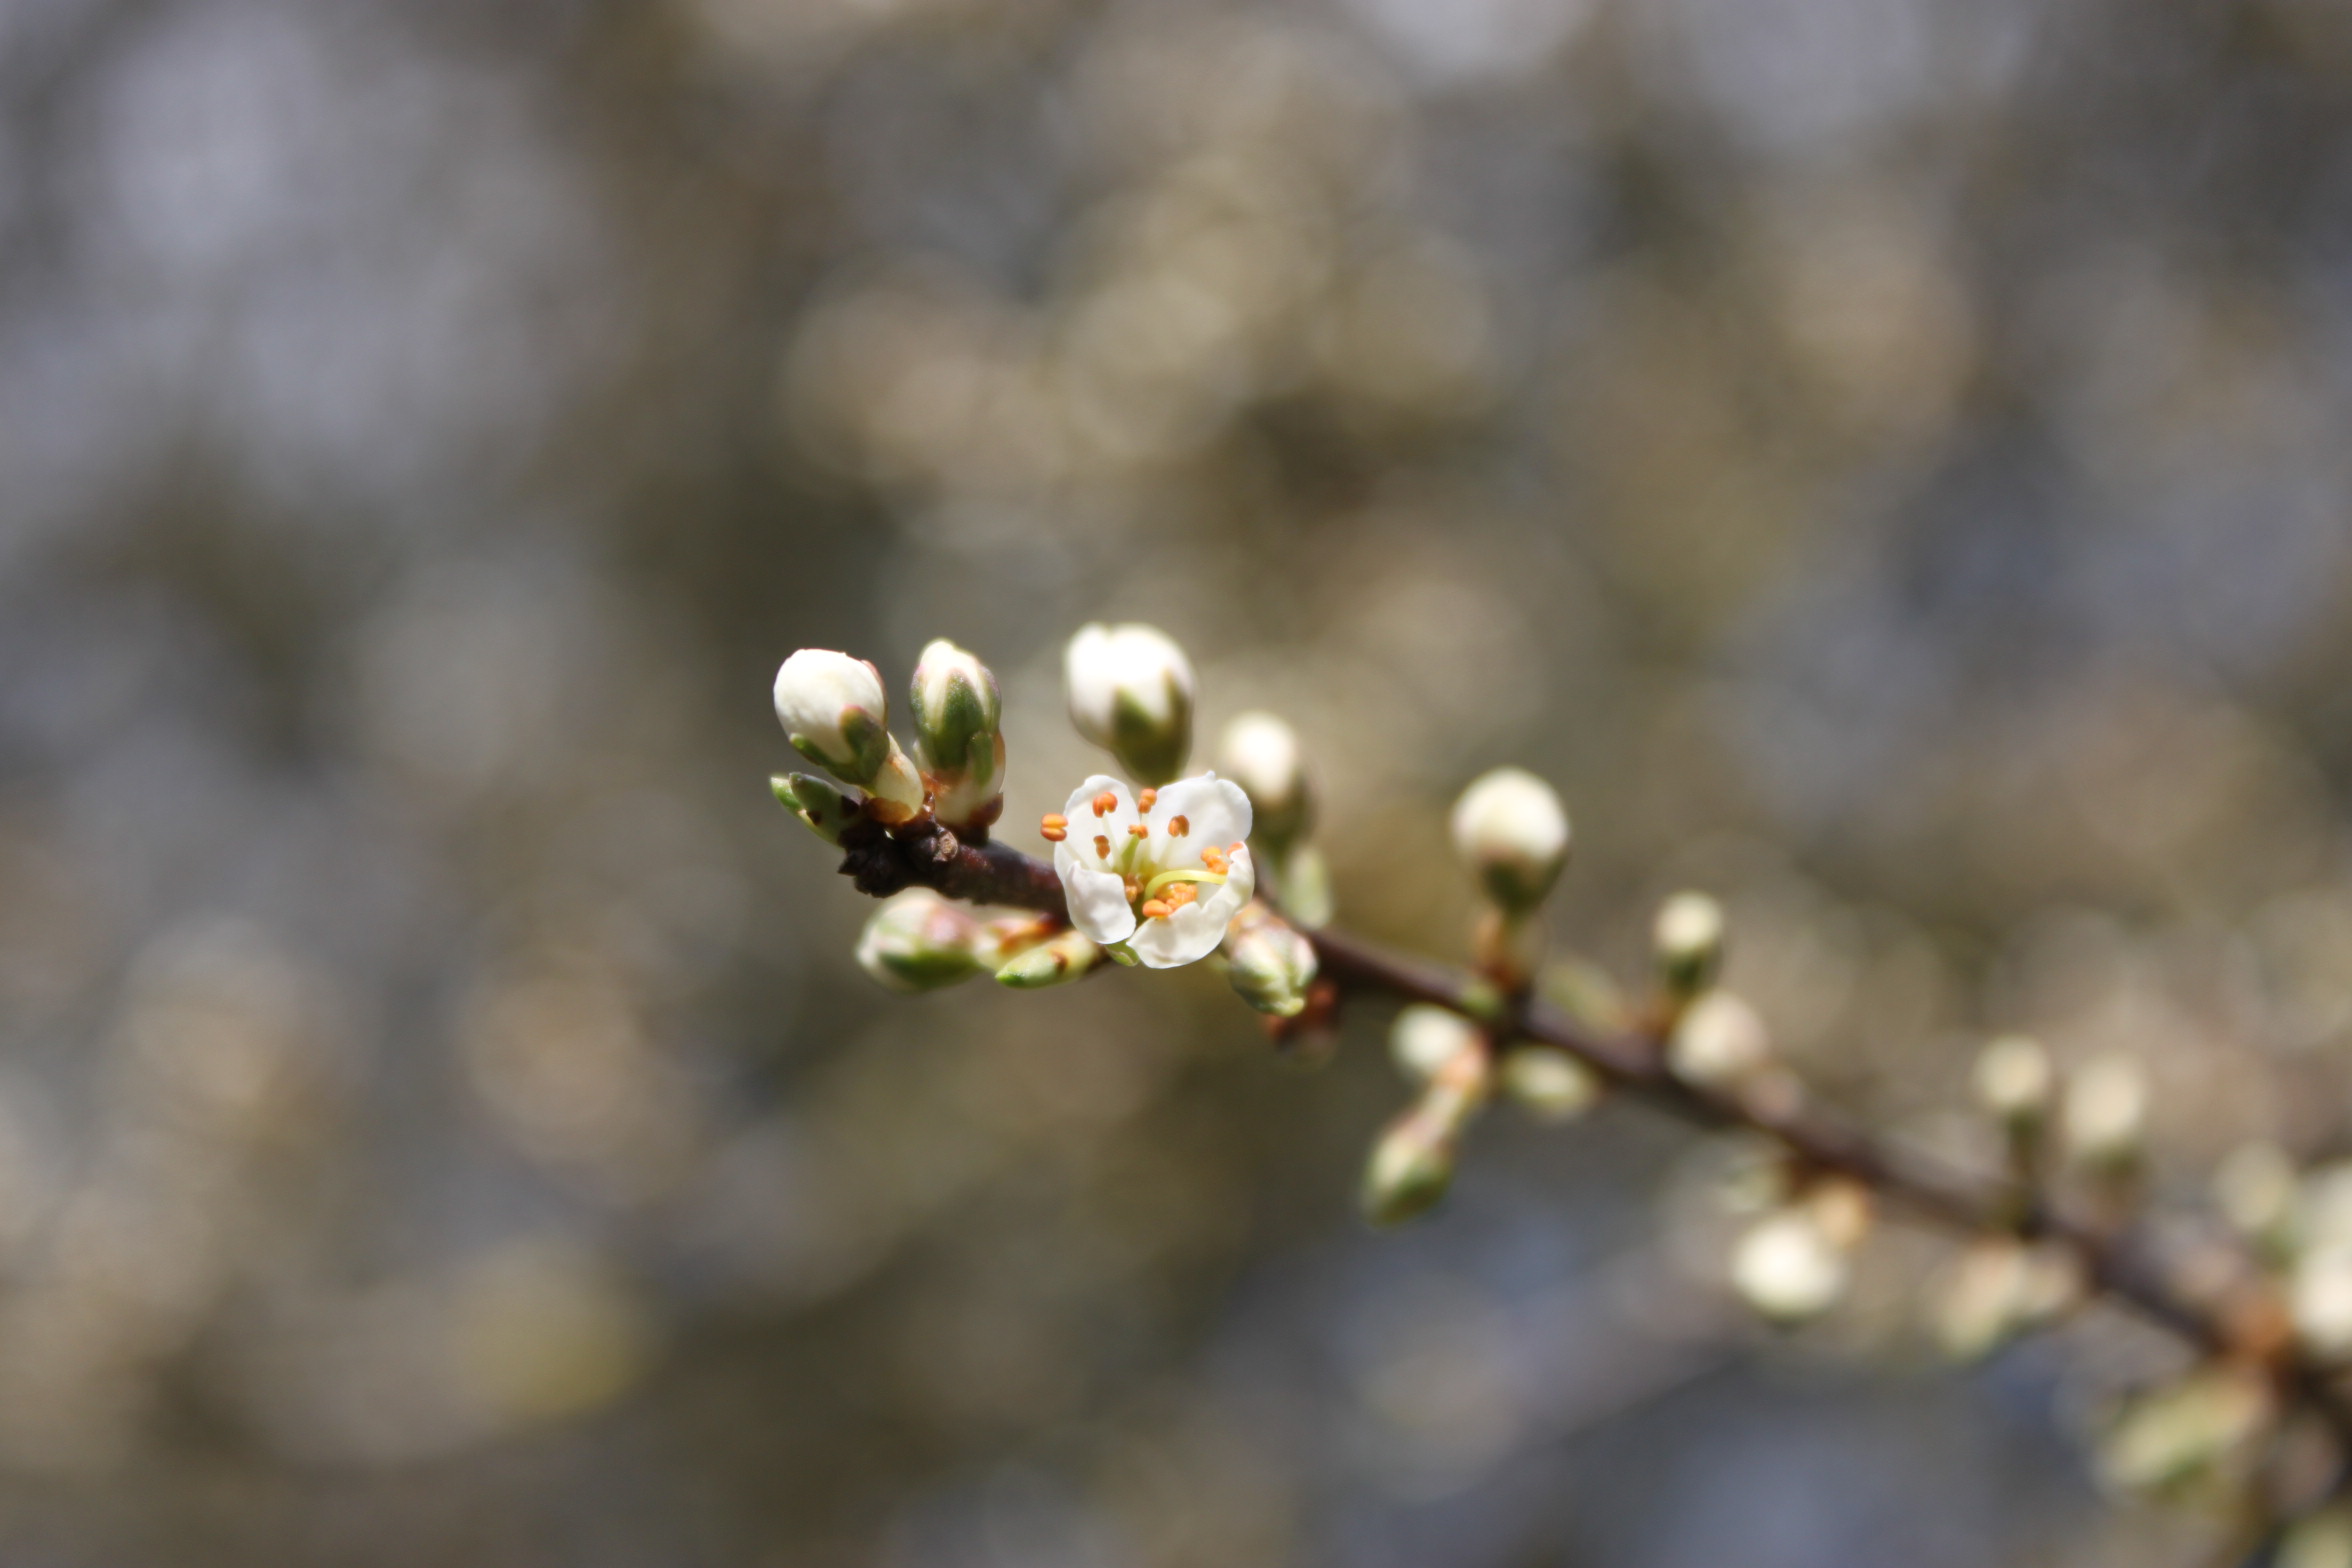 Blackthorn branch with flowers